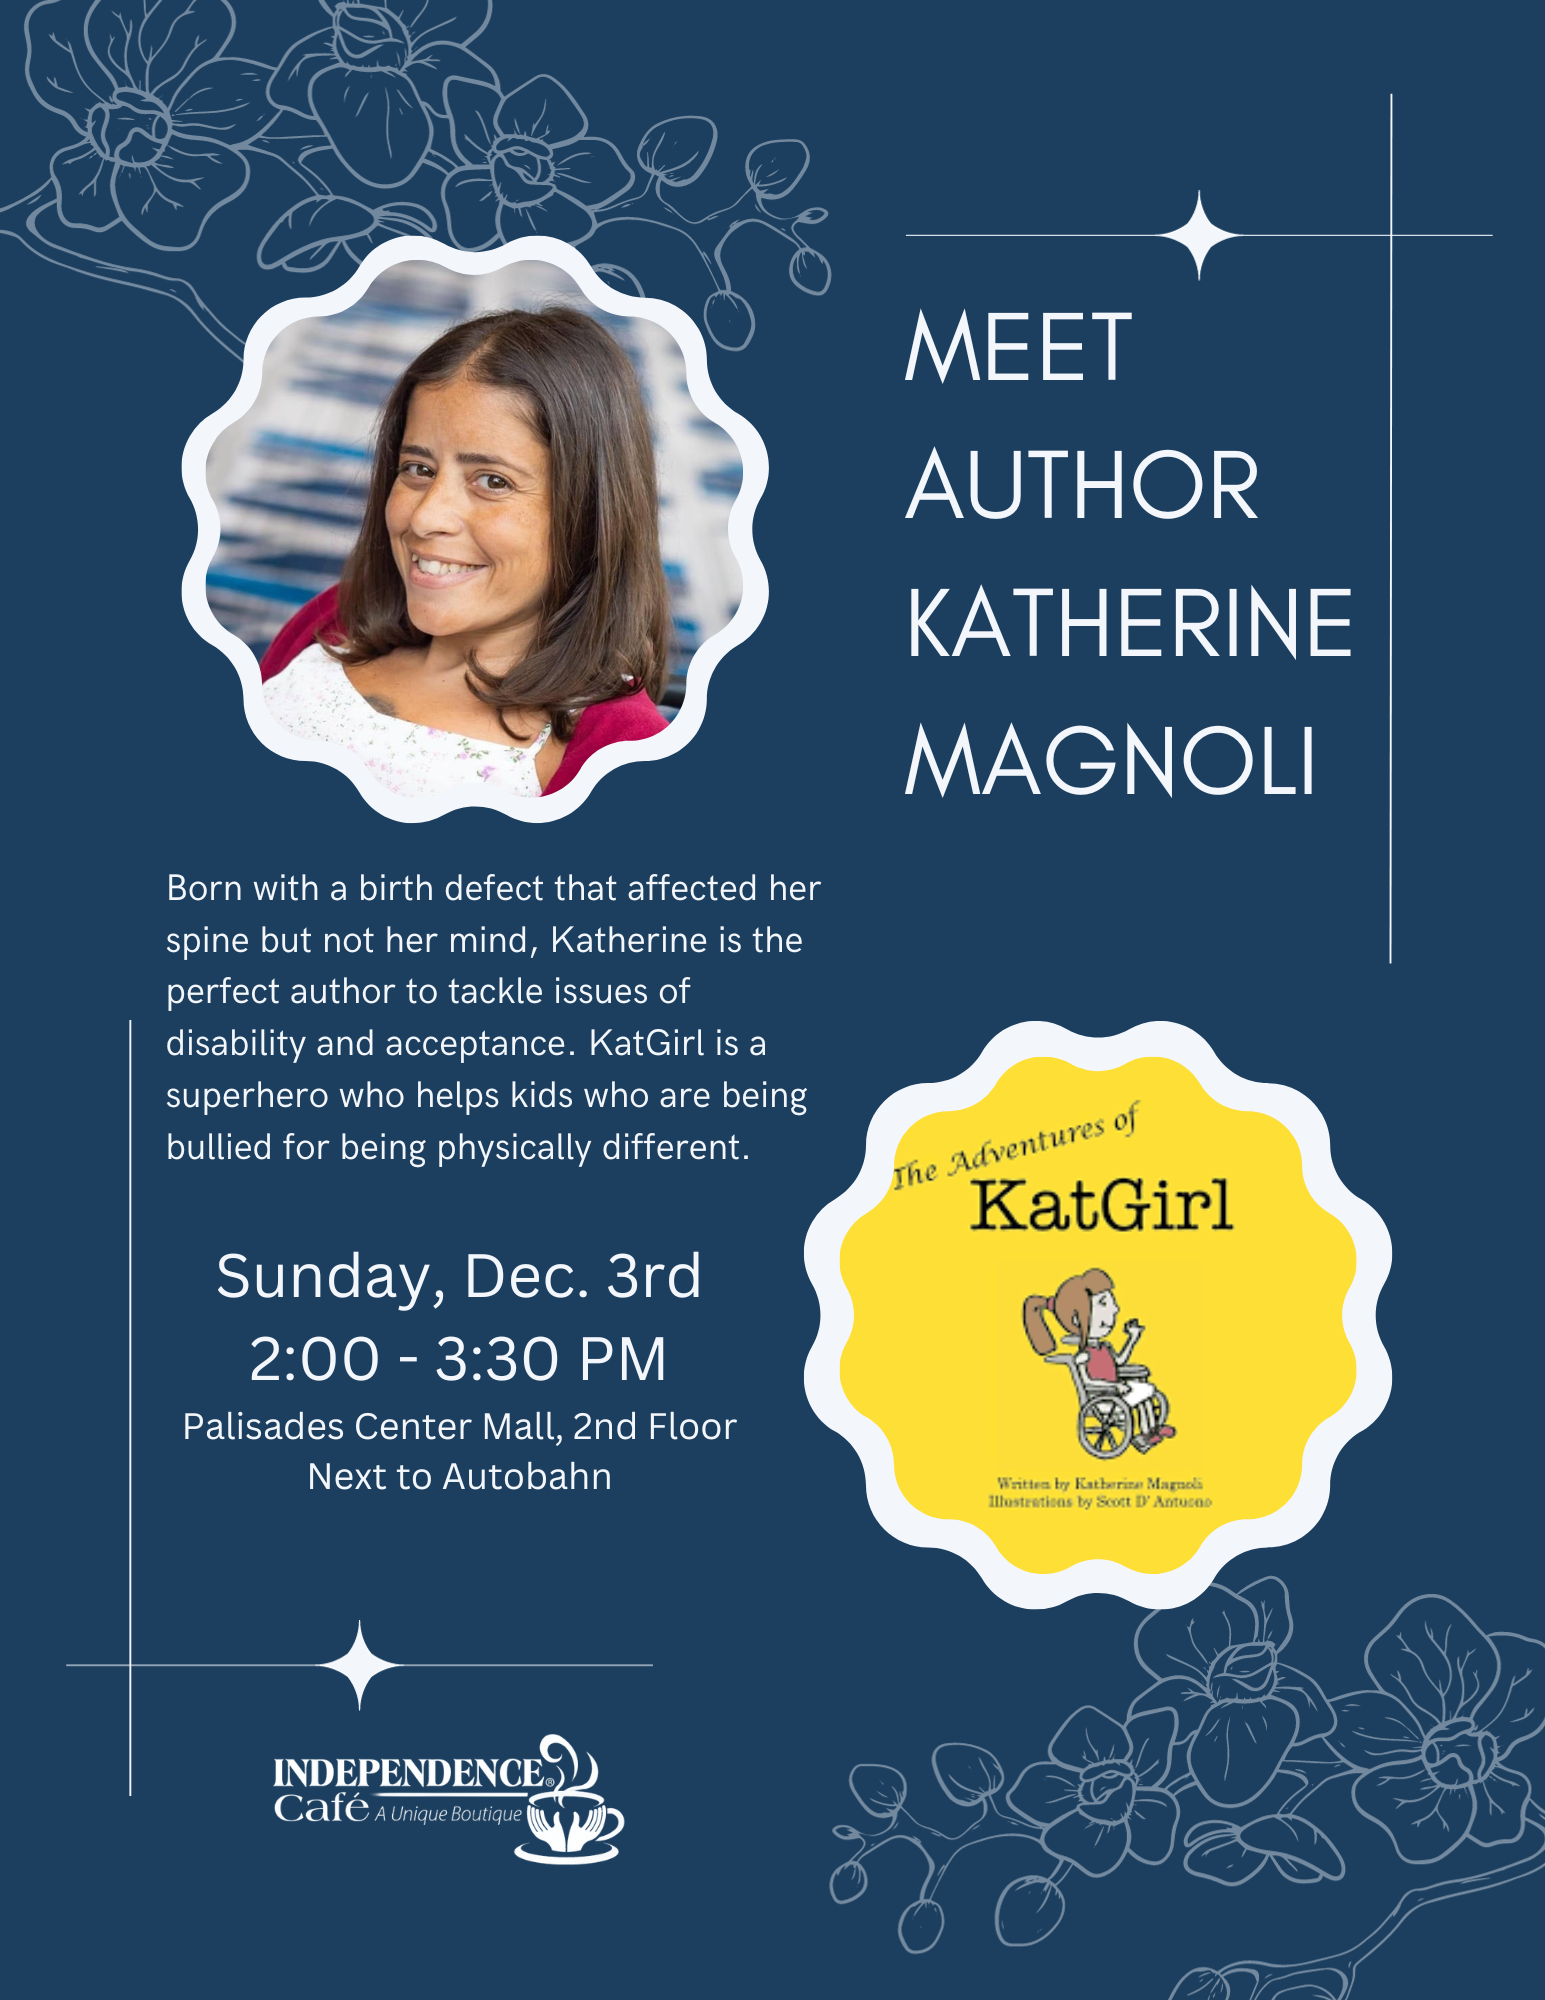 Meet author Katherine Magnoli. Sunday, December 3 from 2 P-M to 3:30 P-M. Palisades Center Mall, 2nd Floor next to Autobahn. Independence Cafe a Unique Boutique. Born with a birth defect that affected her spine but not her mind, Katherine is the perfect author to tackle issues of disability and acceptance. KatGirl is a superhero who helps kids who are being bullied for being physically different.